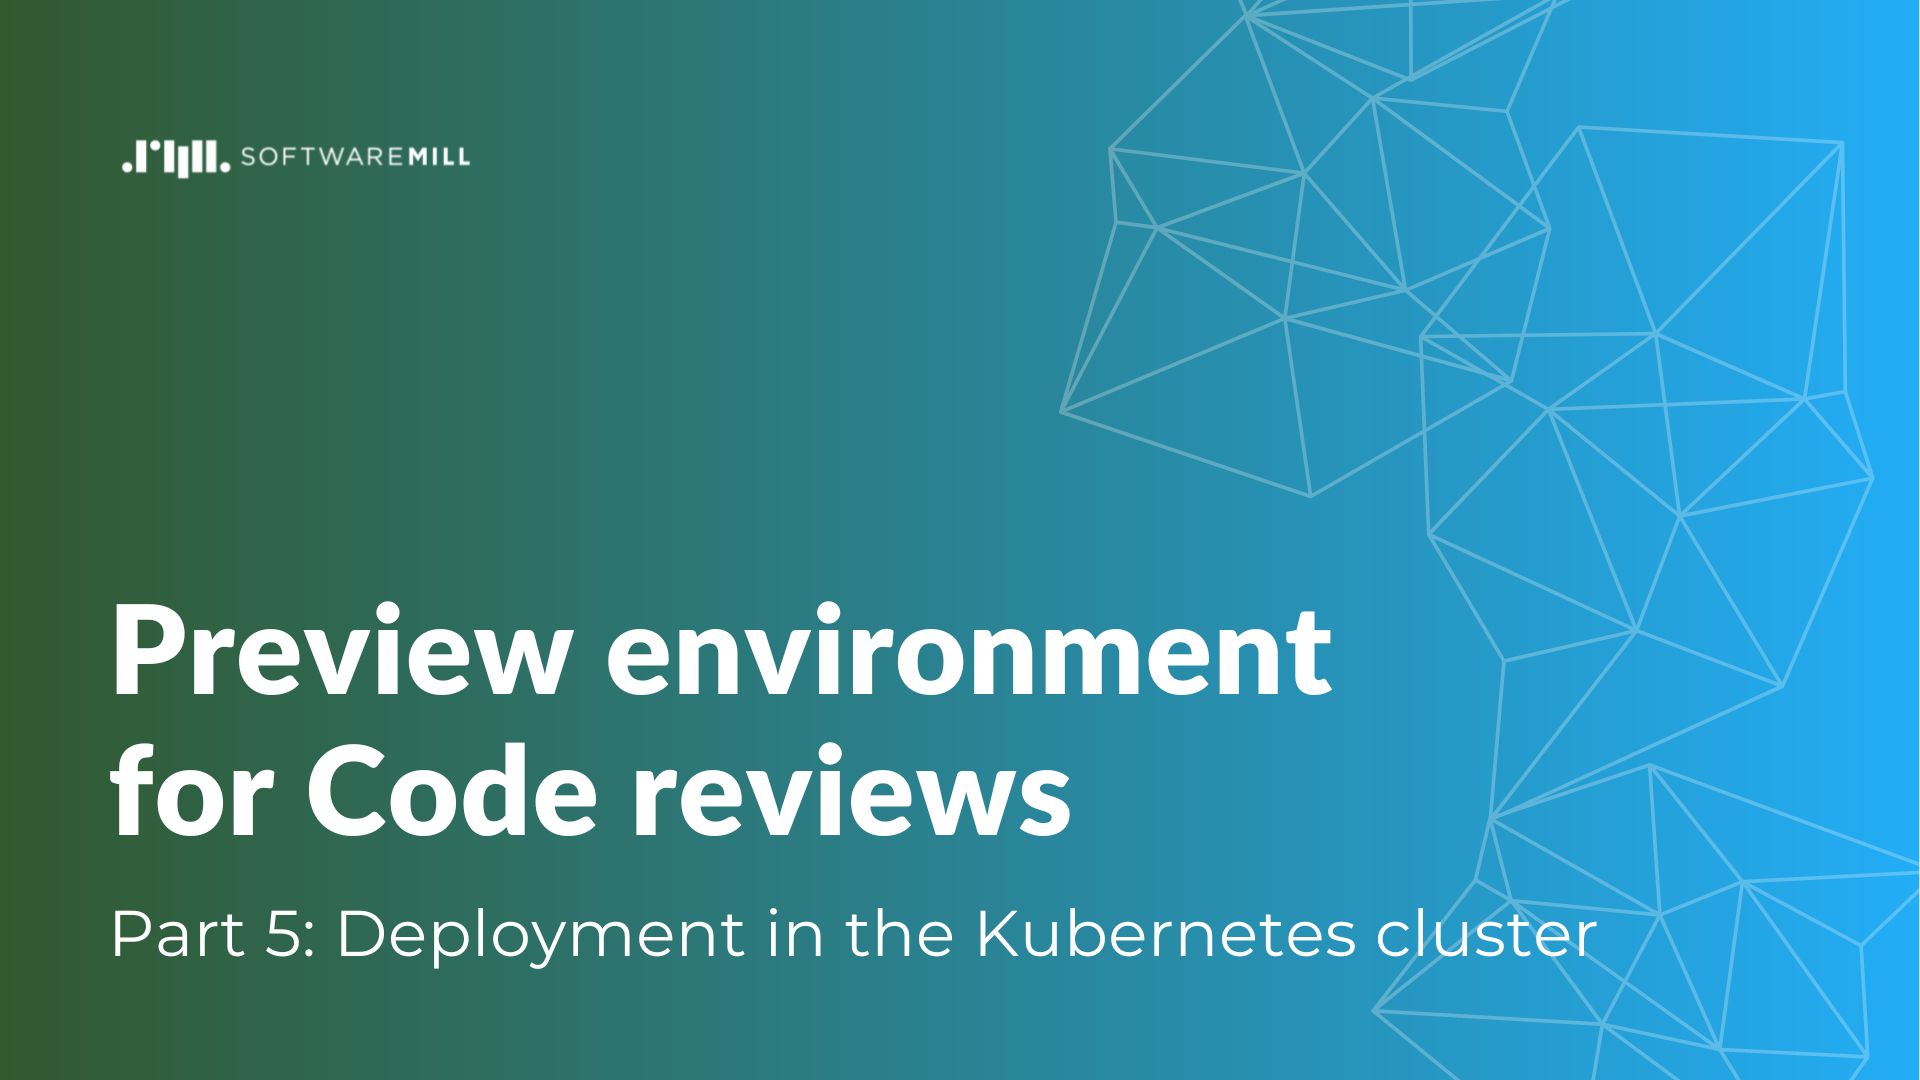 Preview environment for Code reviews, part 5: Deployment in the Kubernetes cluster webp image